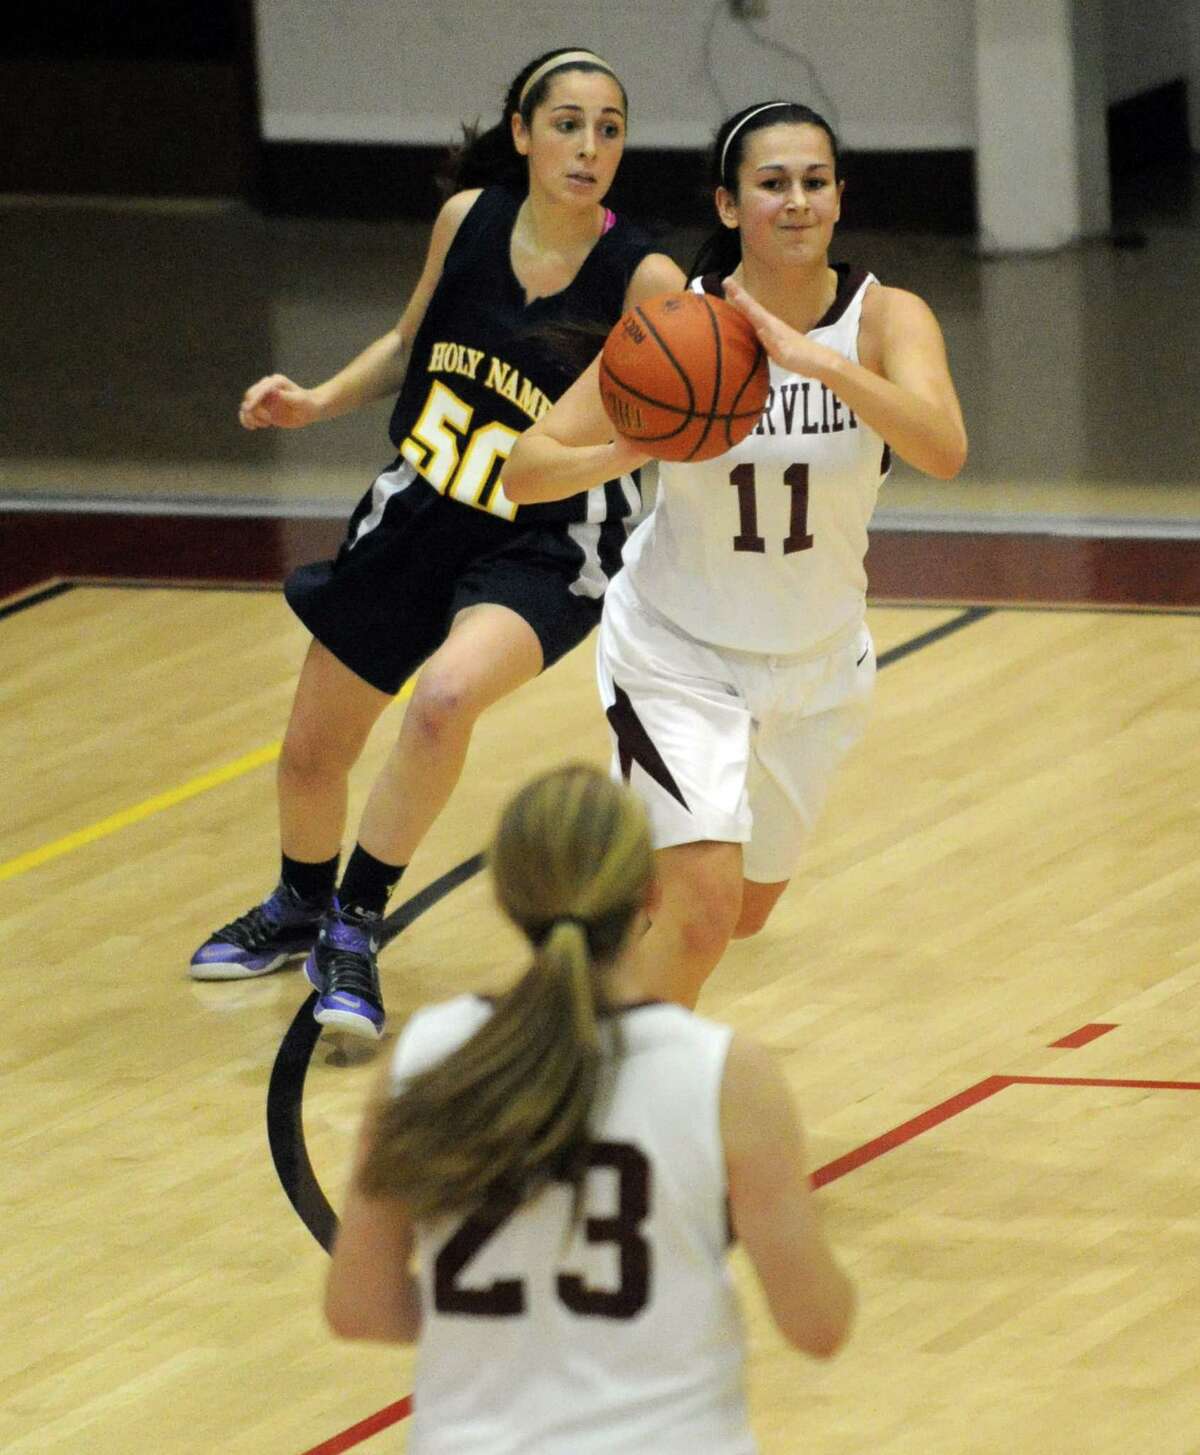 Watervliet's Meghan Capone looks to pass during their high school girl's basketball game against Holy Names on Tuesday Dec. 16, 2014 in Watervliet ,N.Y. (Michael P. Farrell/Times Union)